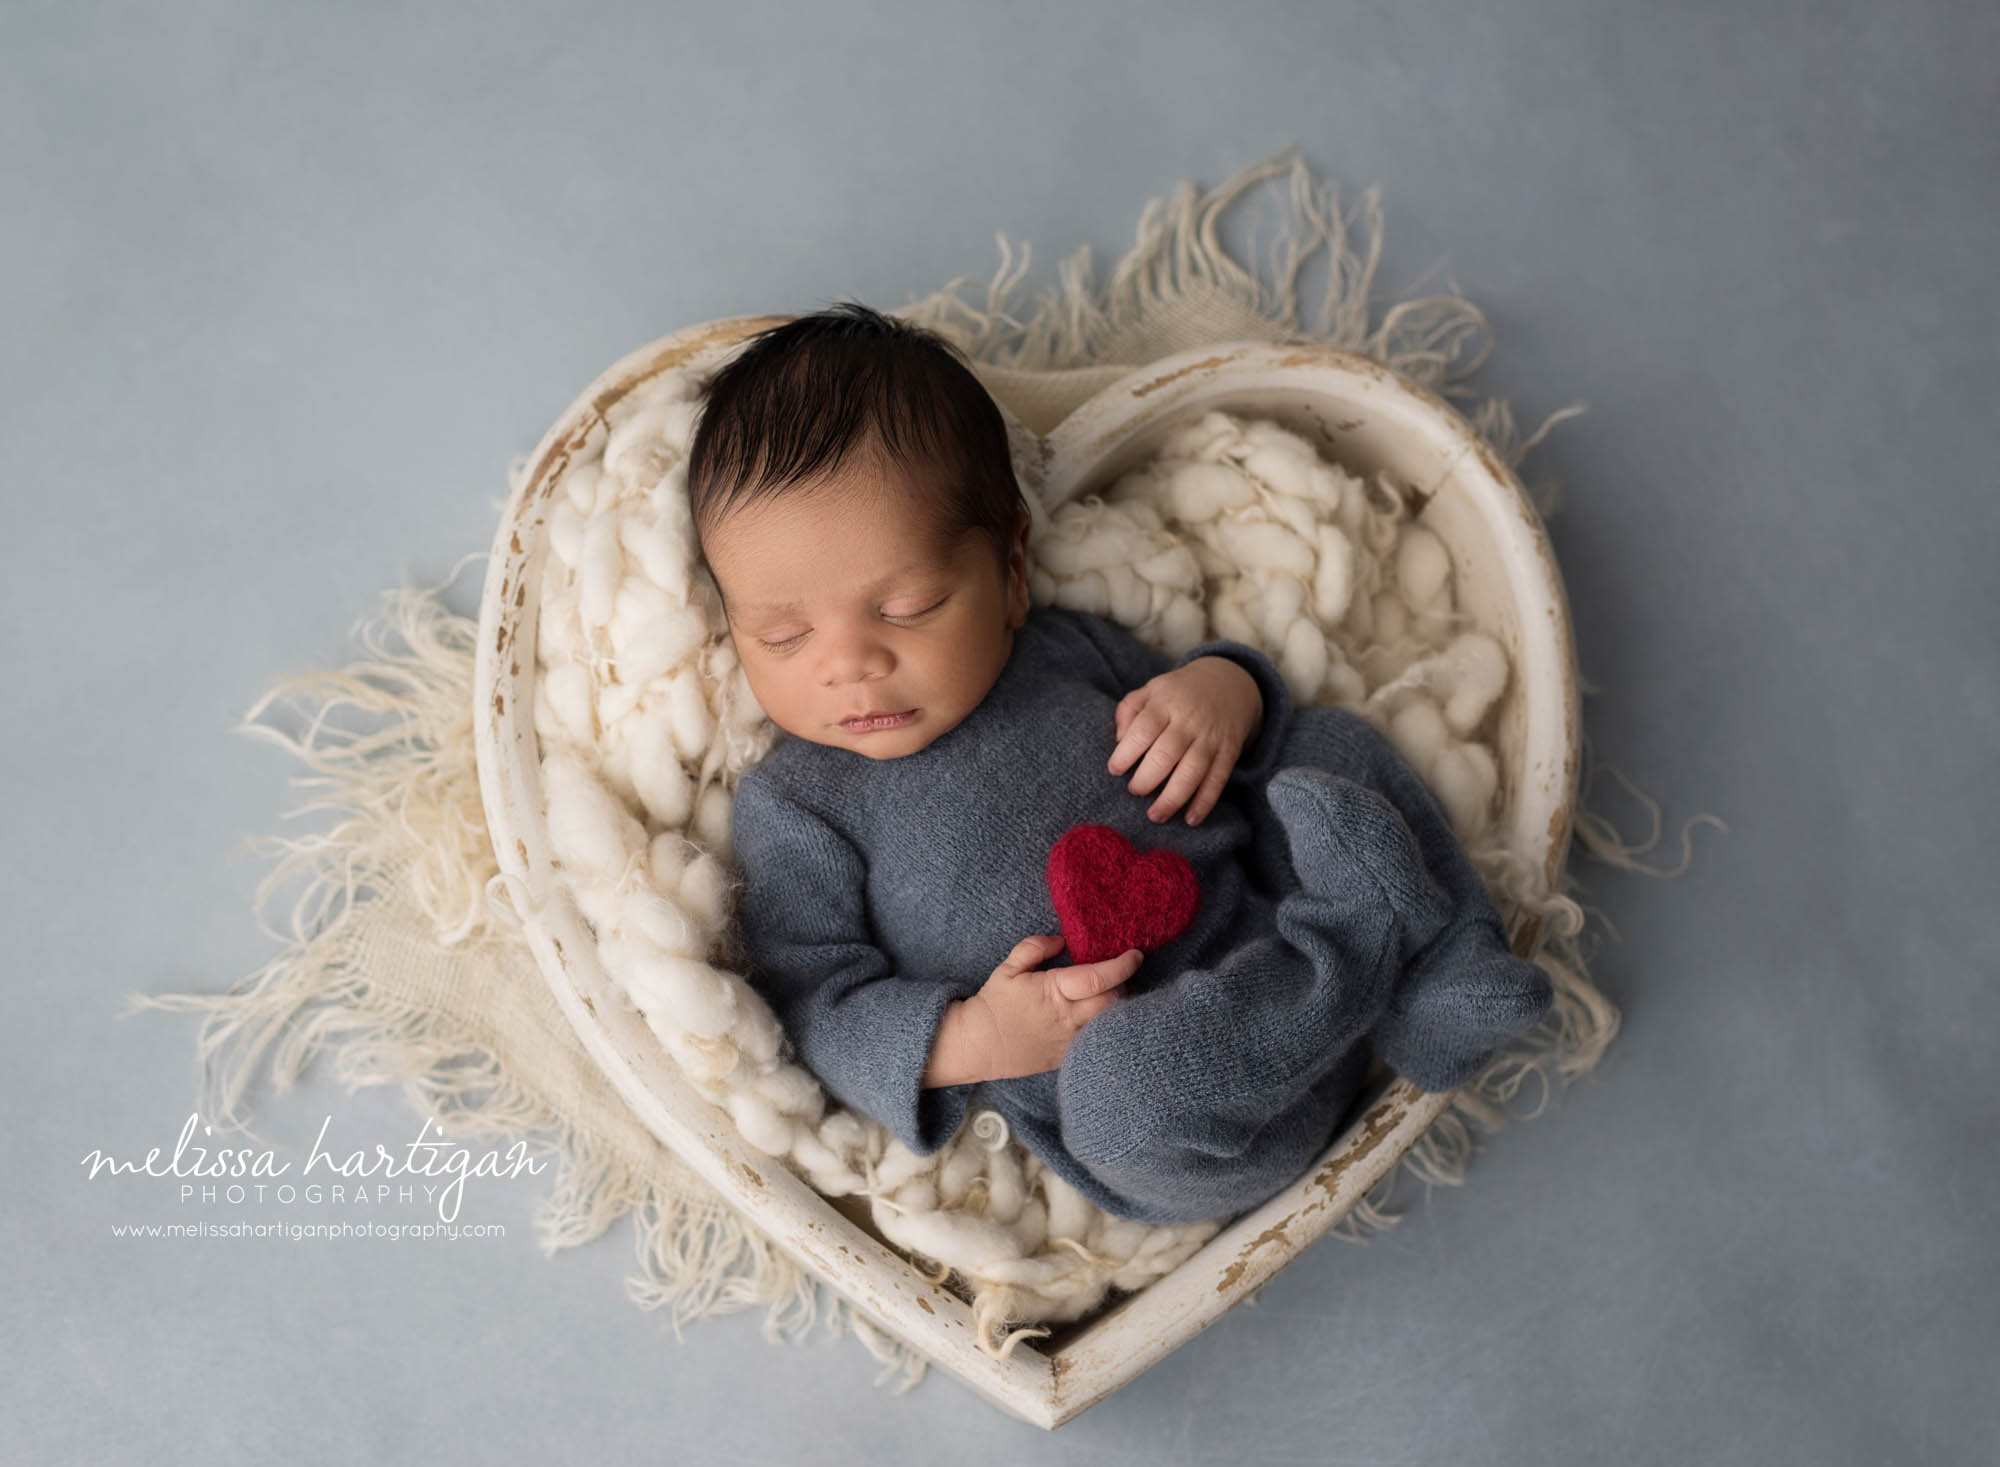 newborn baby boy wearing blue outfit posed cream wooden heart prop holding red felted heart newborn photography rocky hill